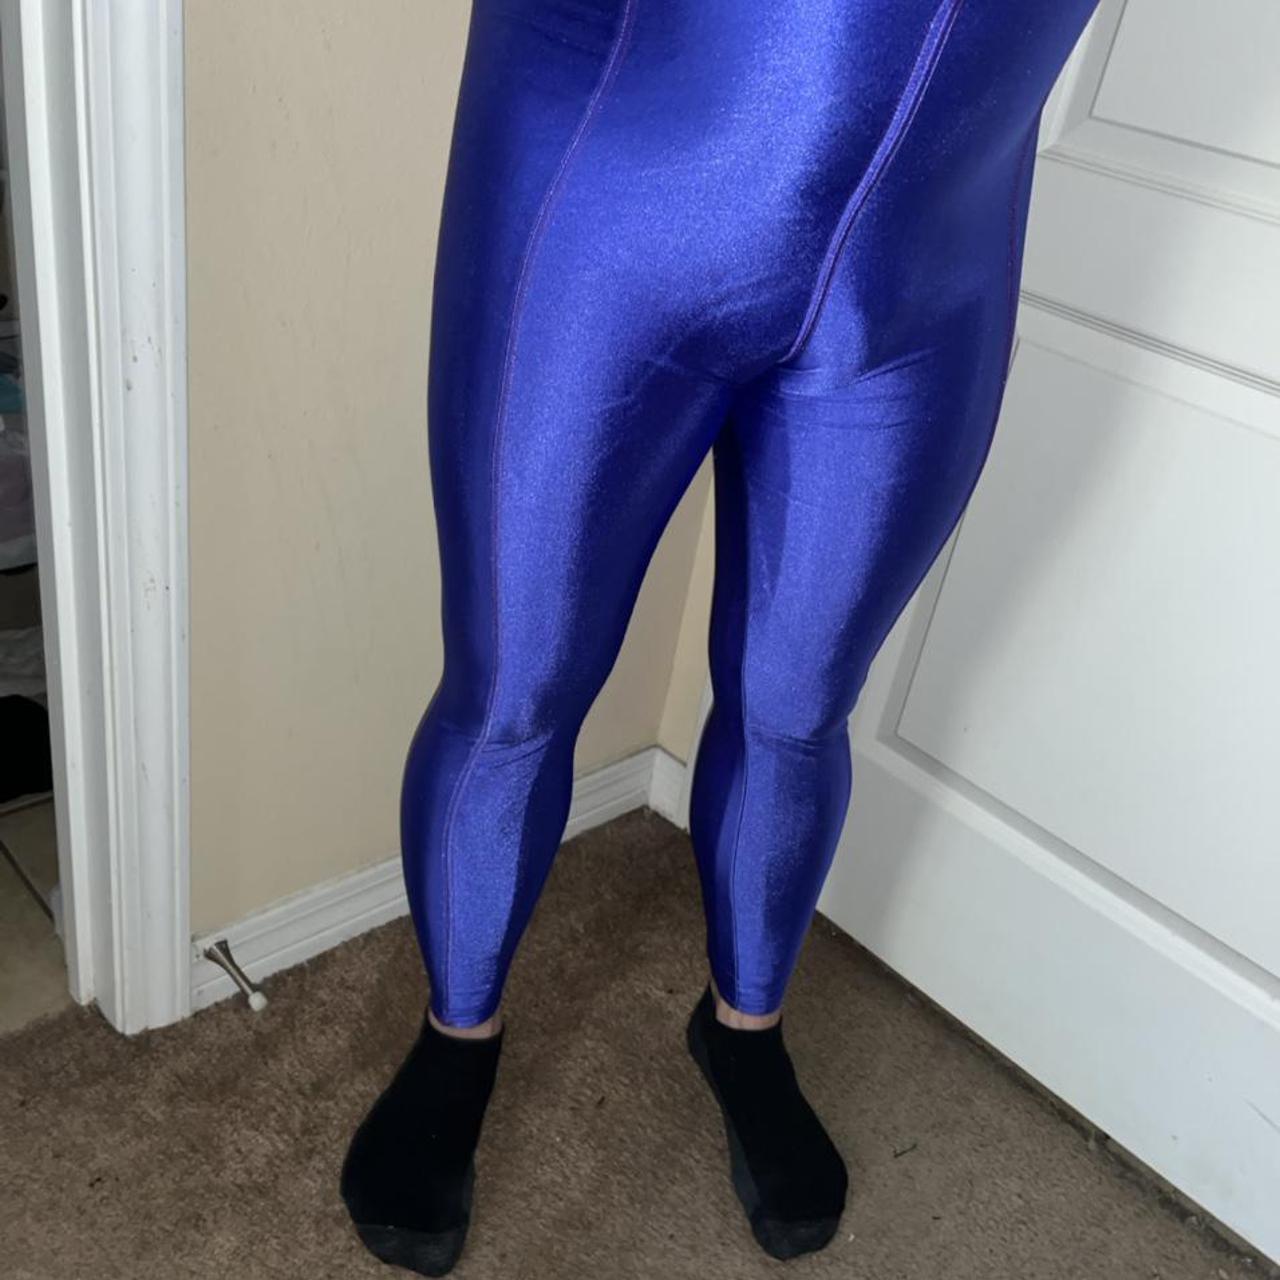 Super shiny leggings in a size small. These will - Depop